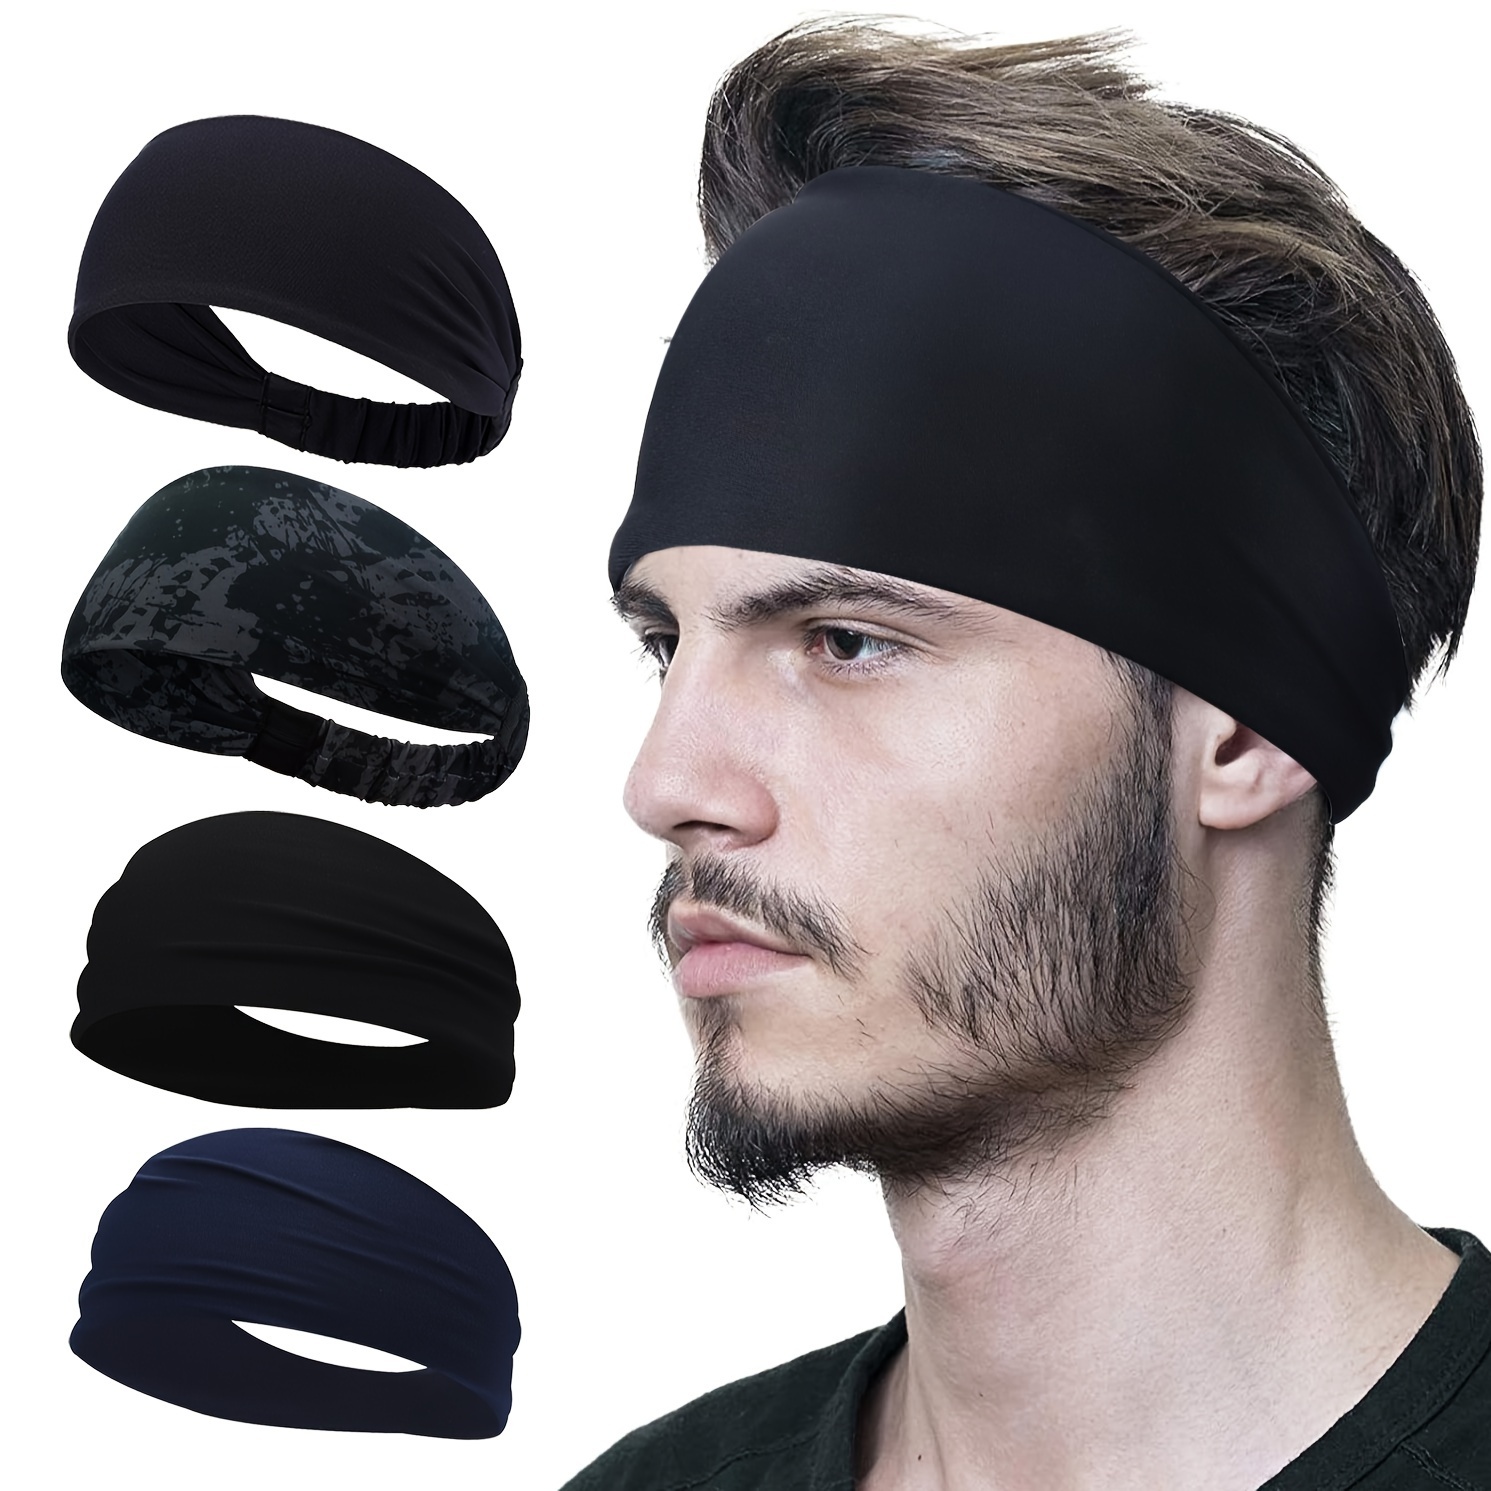 

3pcs Sports Breathable Stretchable Headbands, Unisex Elastic Soft Fabric Sweatband, For Running, Yoga And Gym Fitness, For Men Women